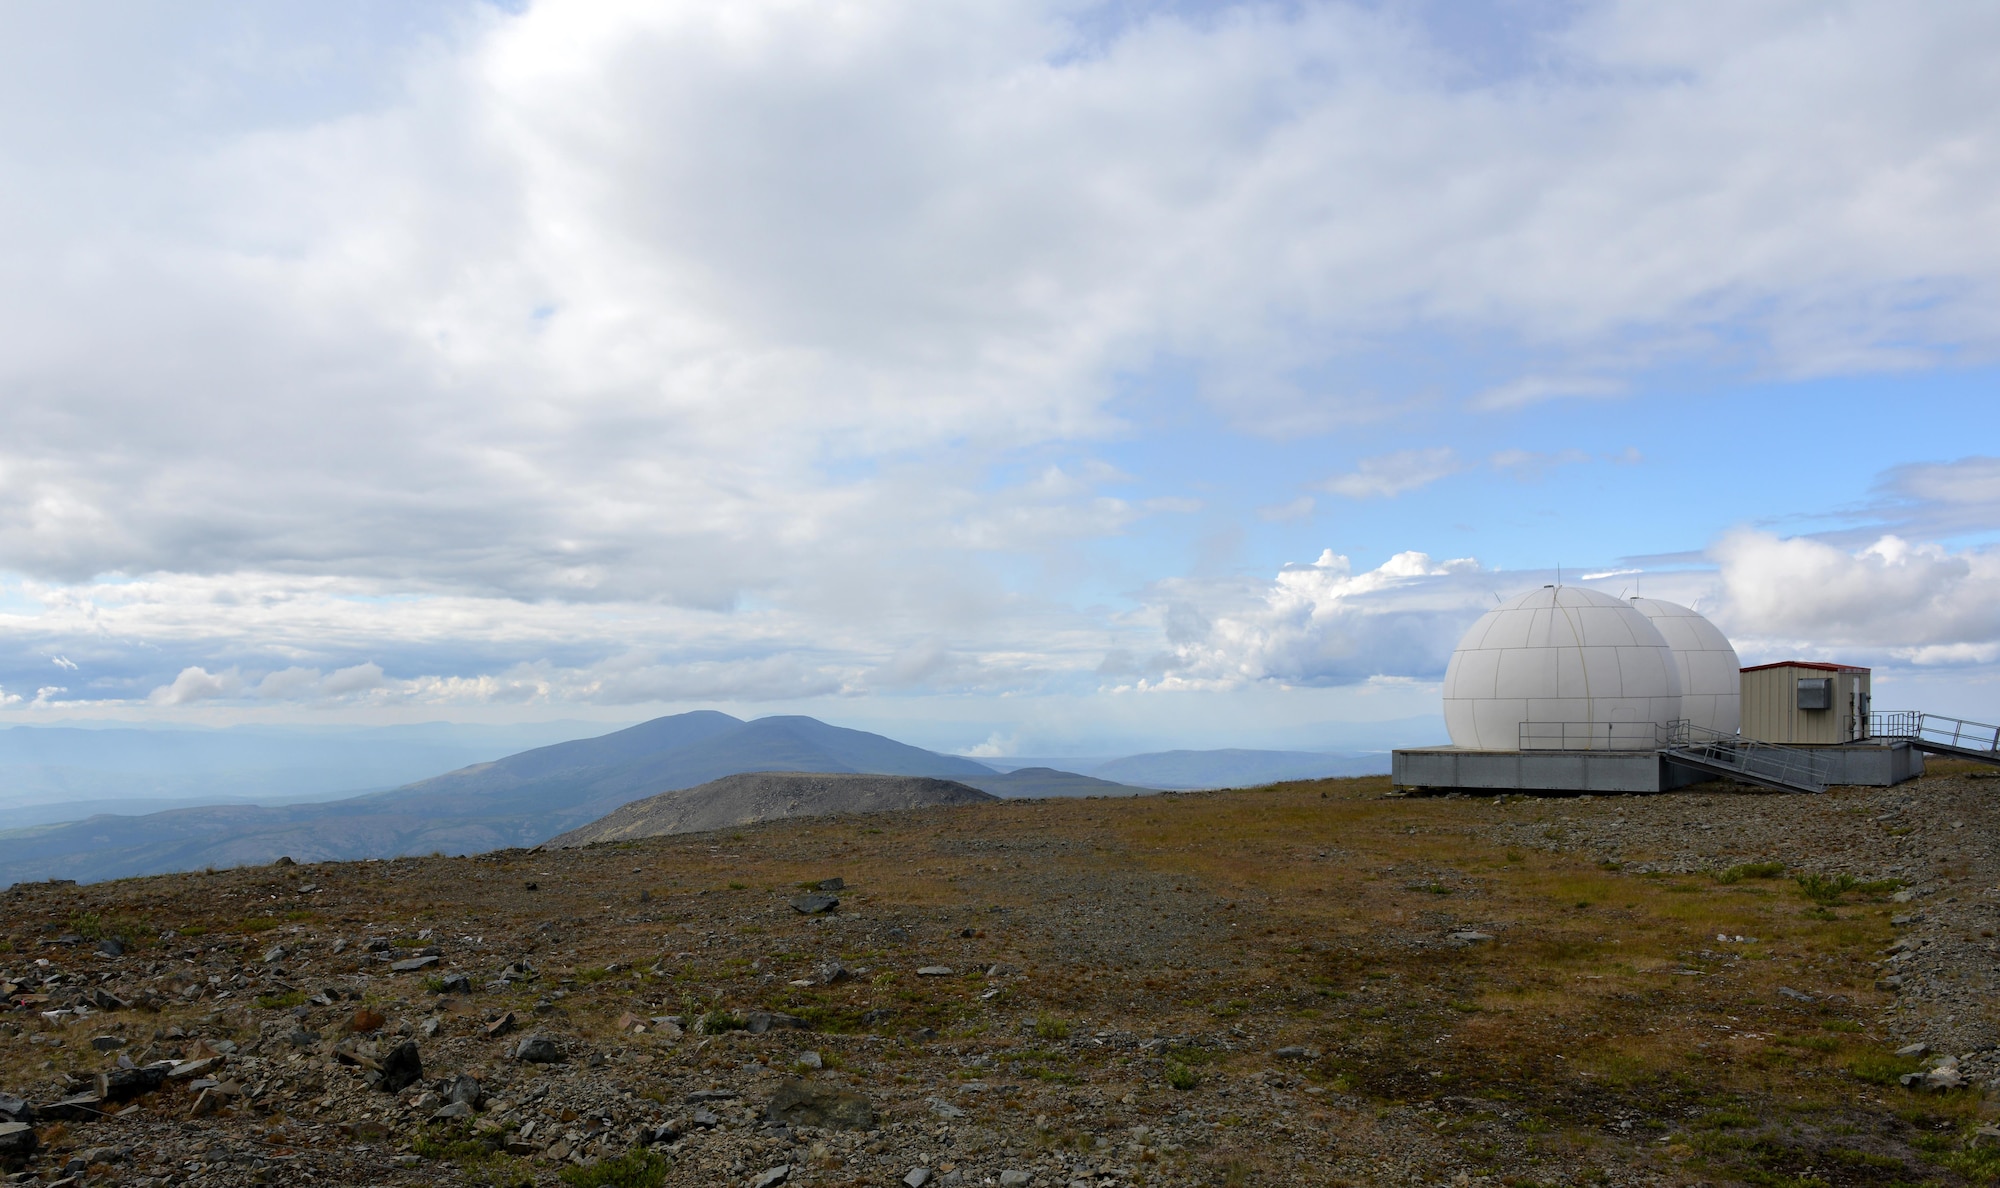 The Indian Mountain long-range radar site is one of many sites with a mission is to track aircraft in Alaska's airspace and along Alaska's borders for unauthorized aircraft. The sites aid in the ongoing defense of U.S. airspace. (U.S. Air Force photo/Airman 1st Class Kyle Johnson)